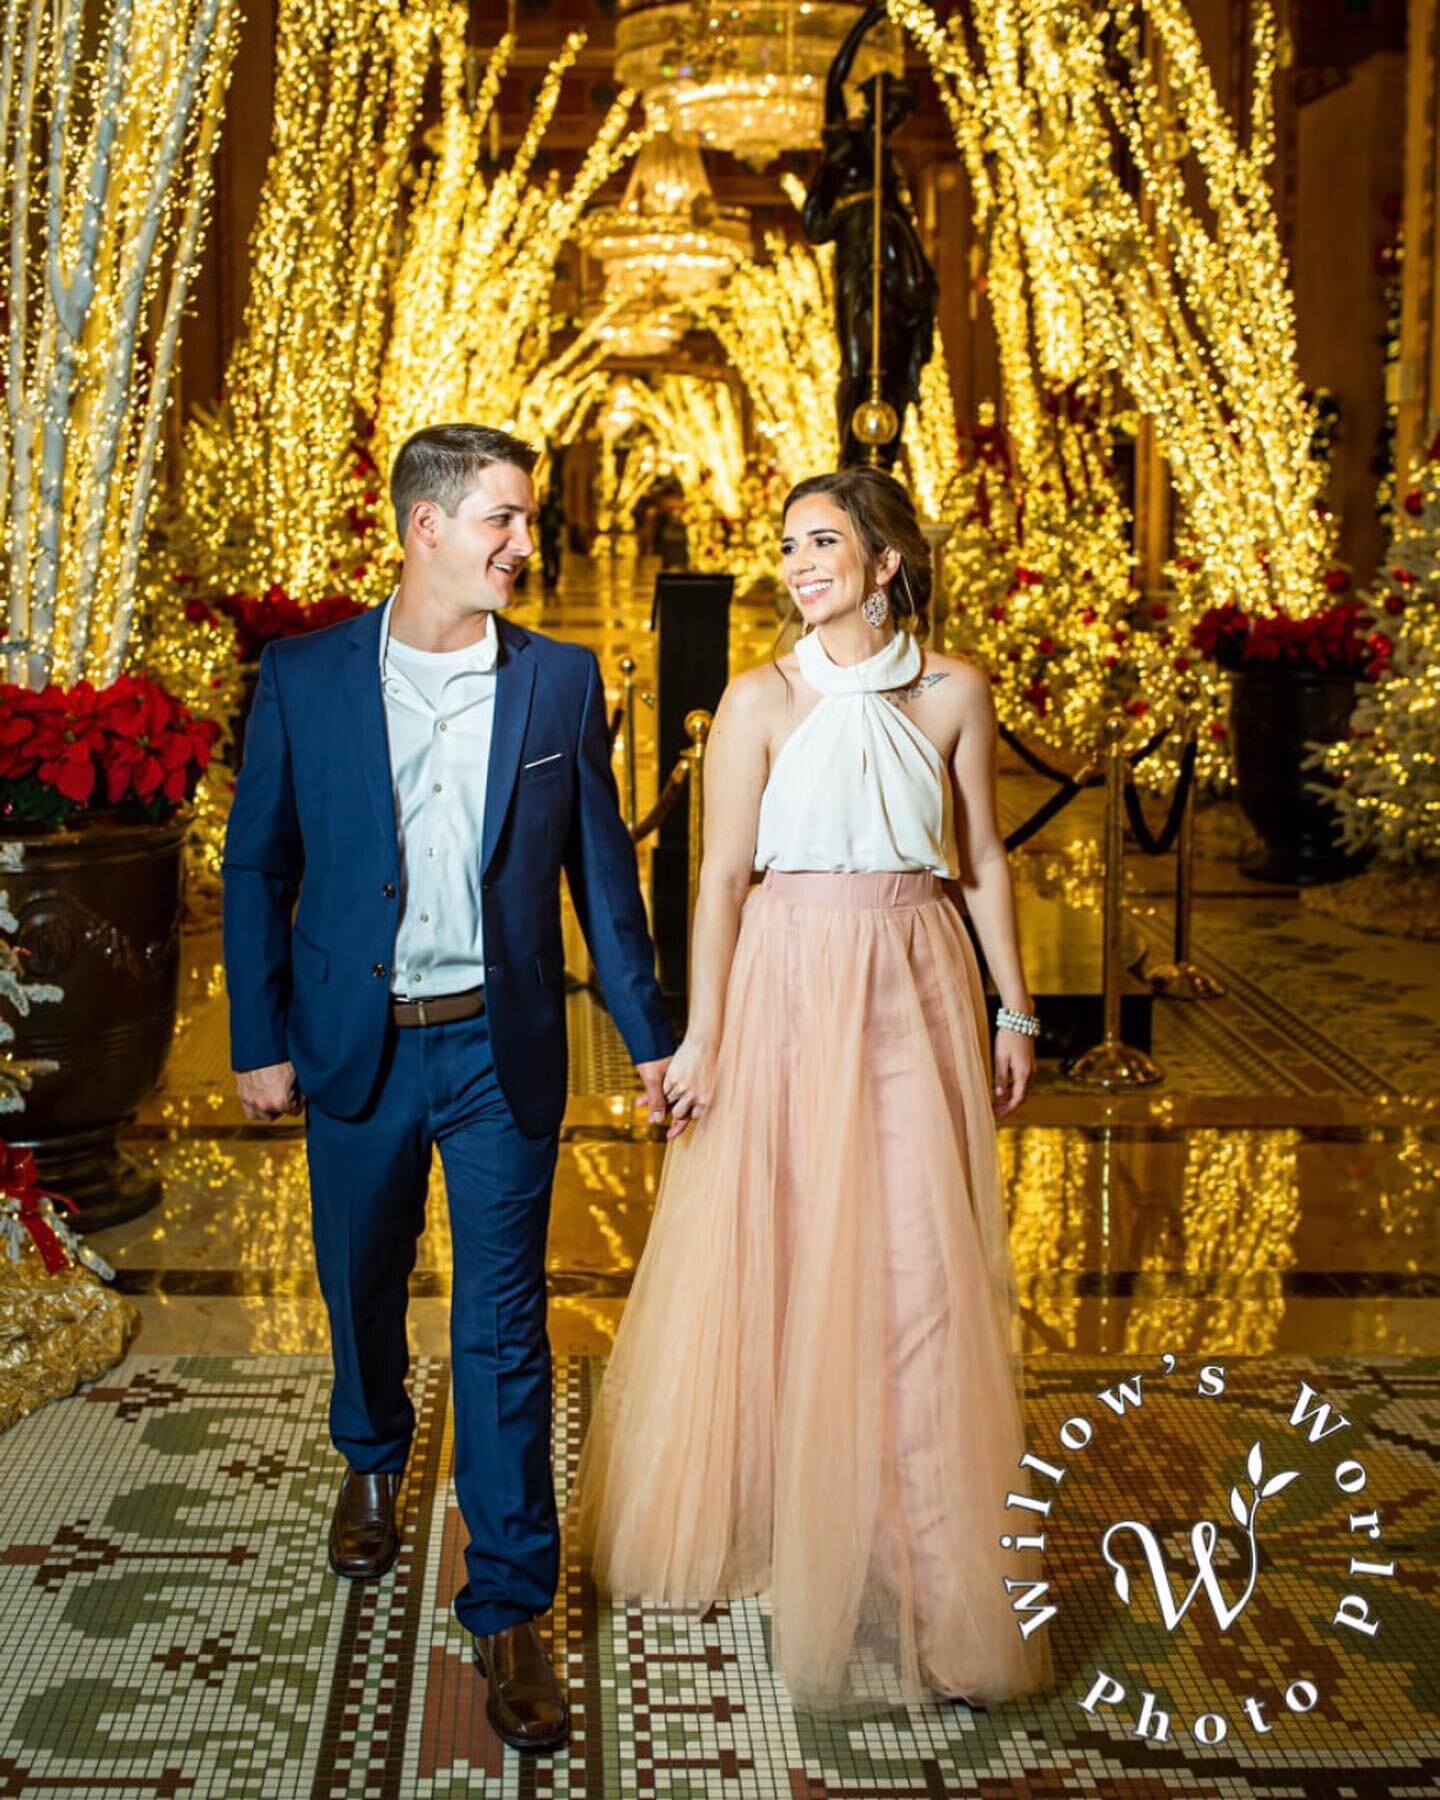 Though stormy weather derailed @welcome2thespace_jann and Bryan&rsquo;s original #NewOrleansEngagement photo session, all was merry and bright at @theroosevelt_no, which had just put up its famous (and inevitably gorgeous!) holiday decorations!  Cong